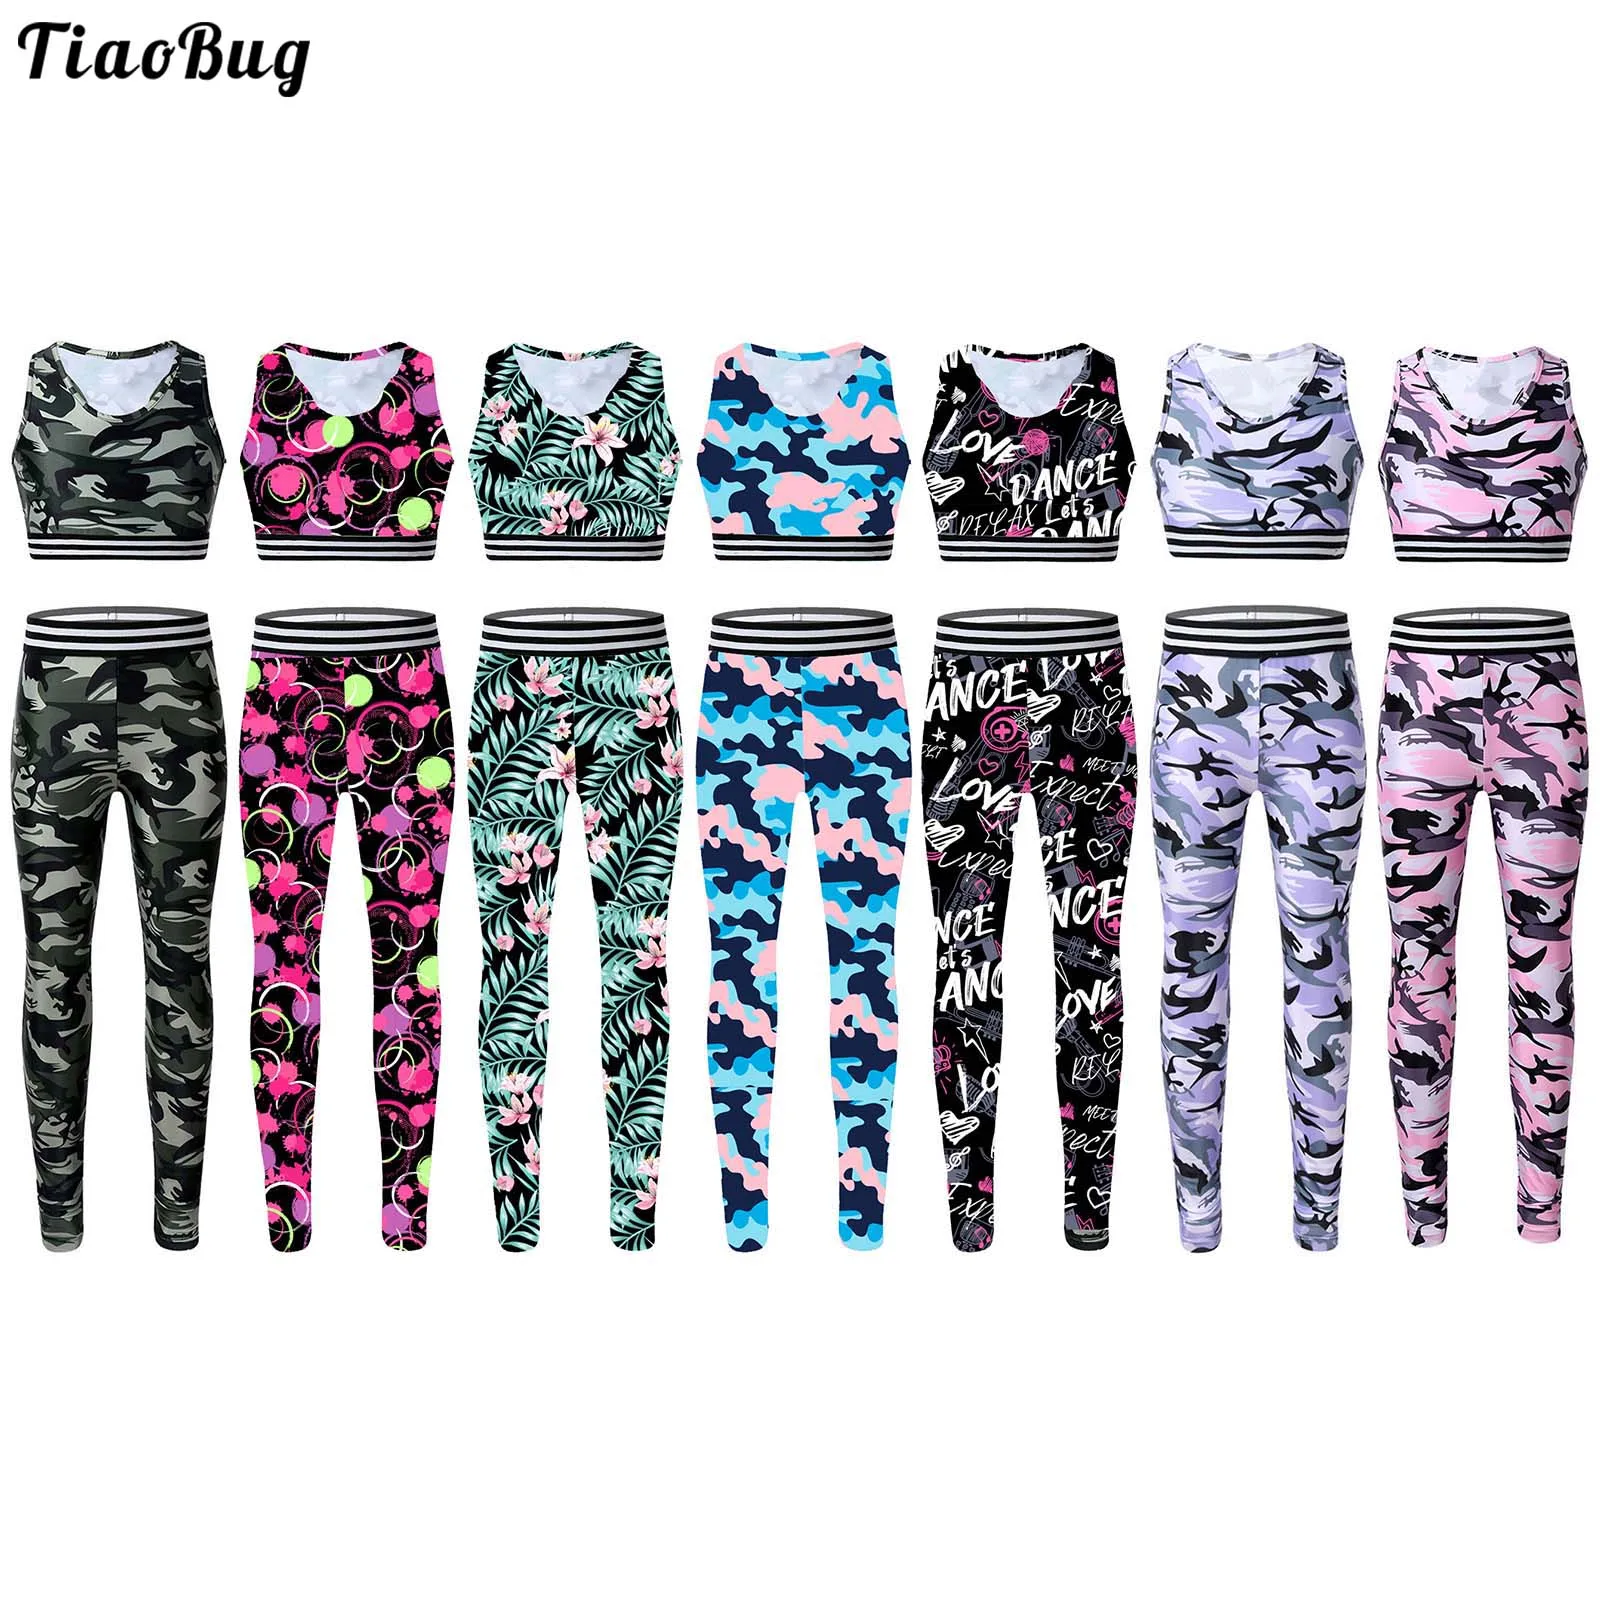 

TiaoBug Summer Kids Girls Tracksuit Yoga Gym Outfit Sleeveless Camouflage Printed Tanks Bra Tops Crop Top With Leggings Pants